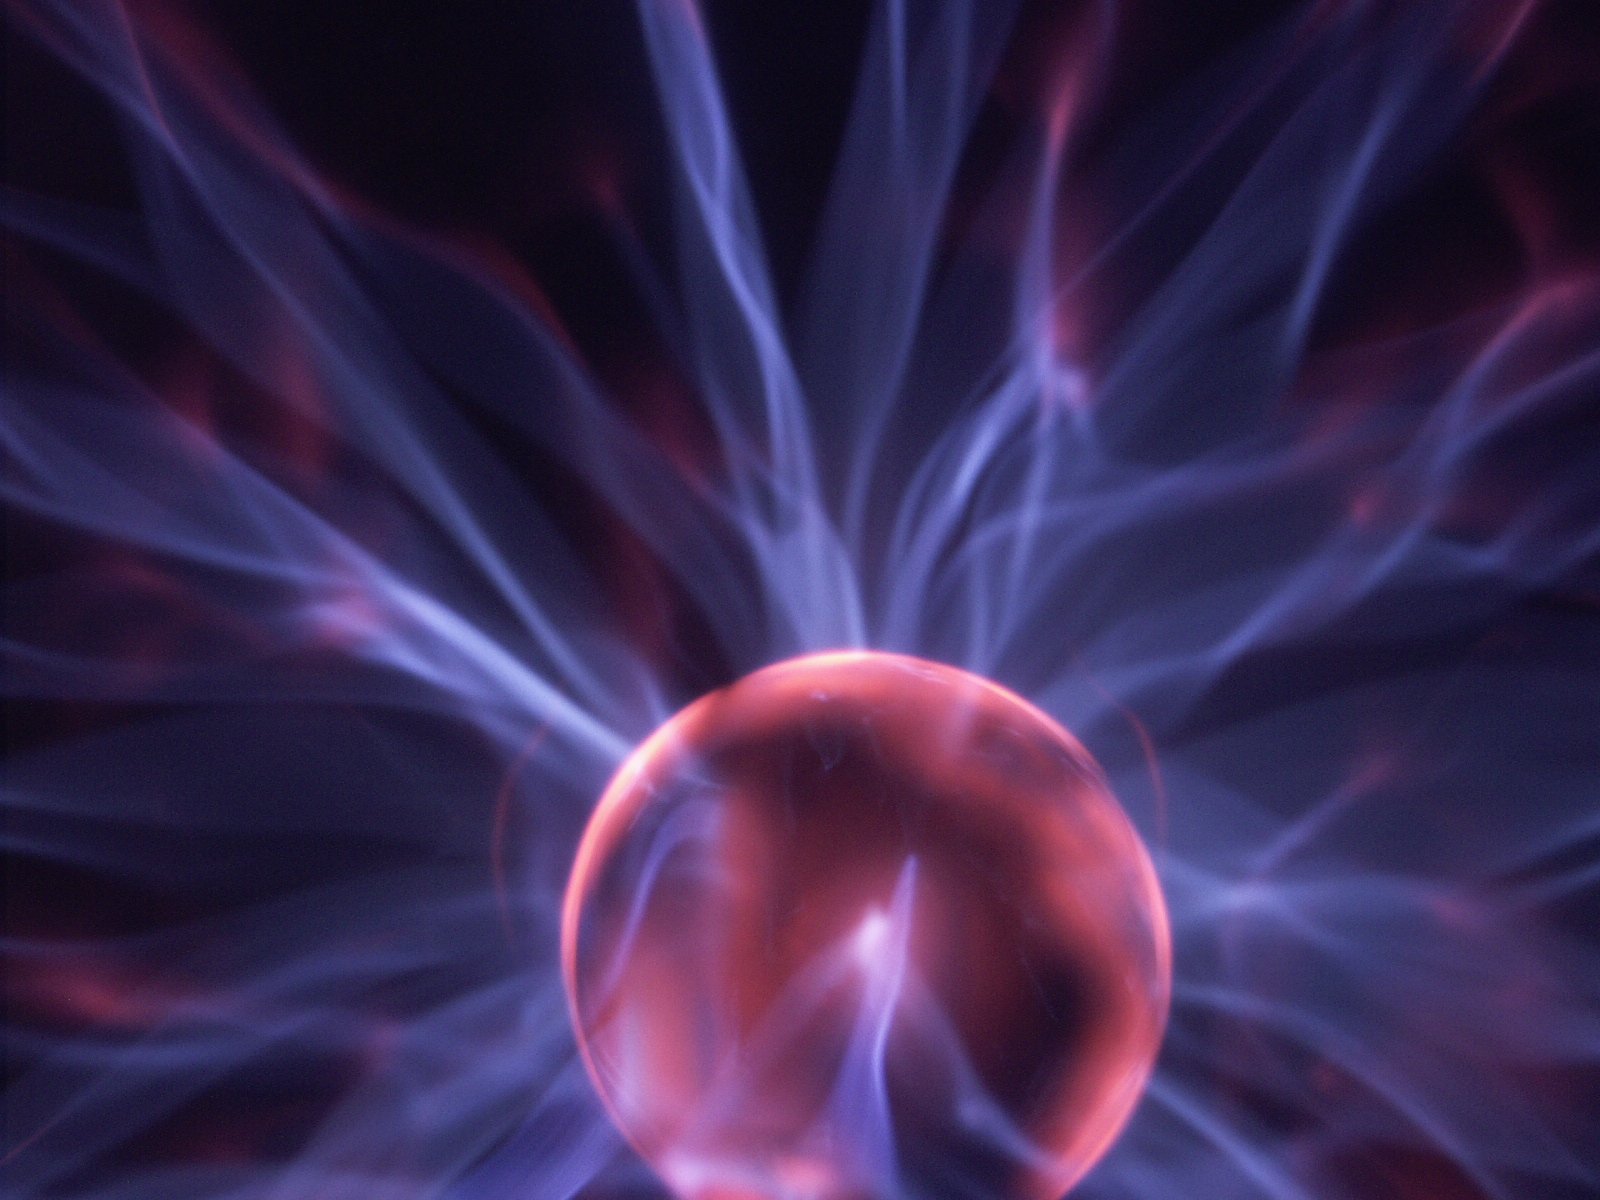 an abstract purple and red object with long lines of light in the center